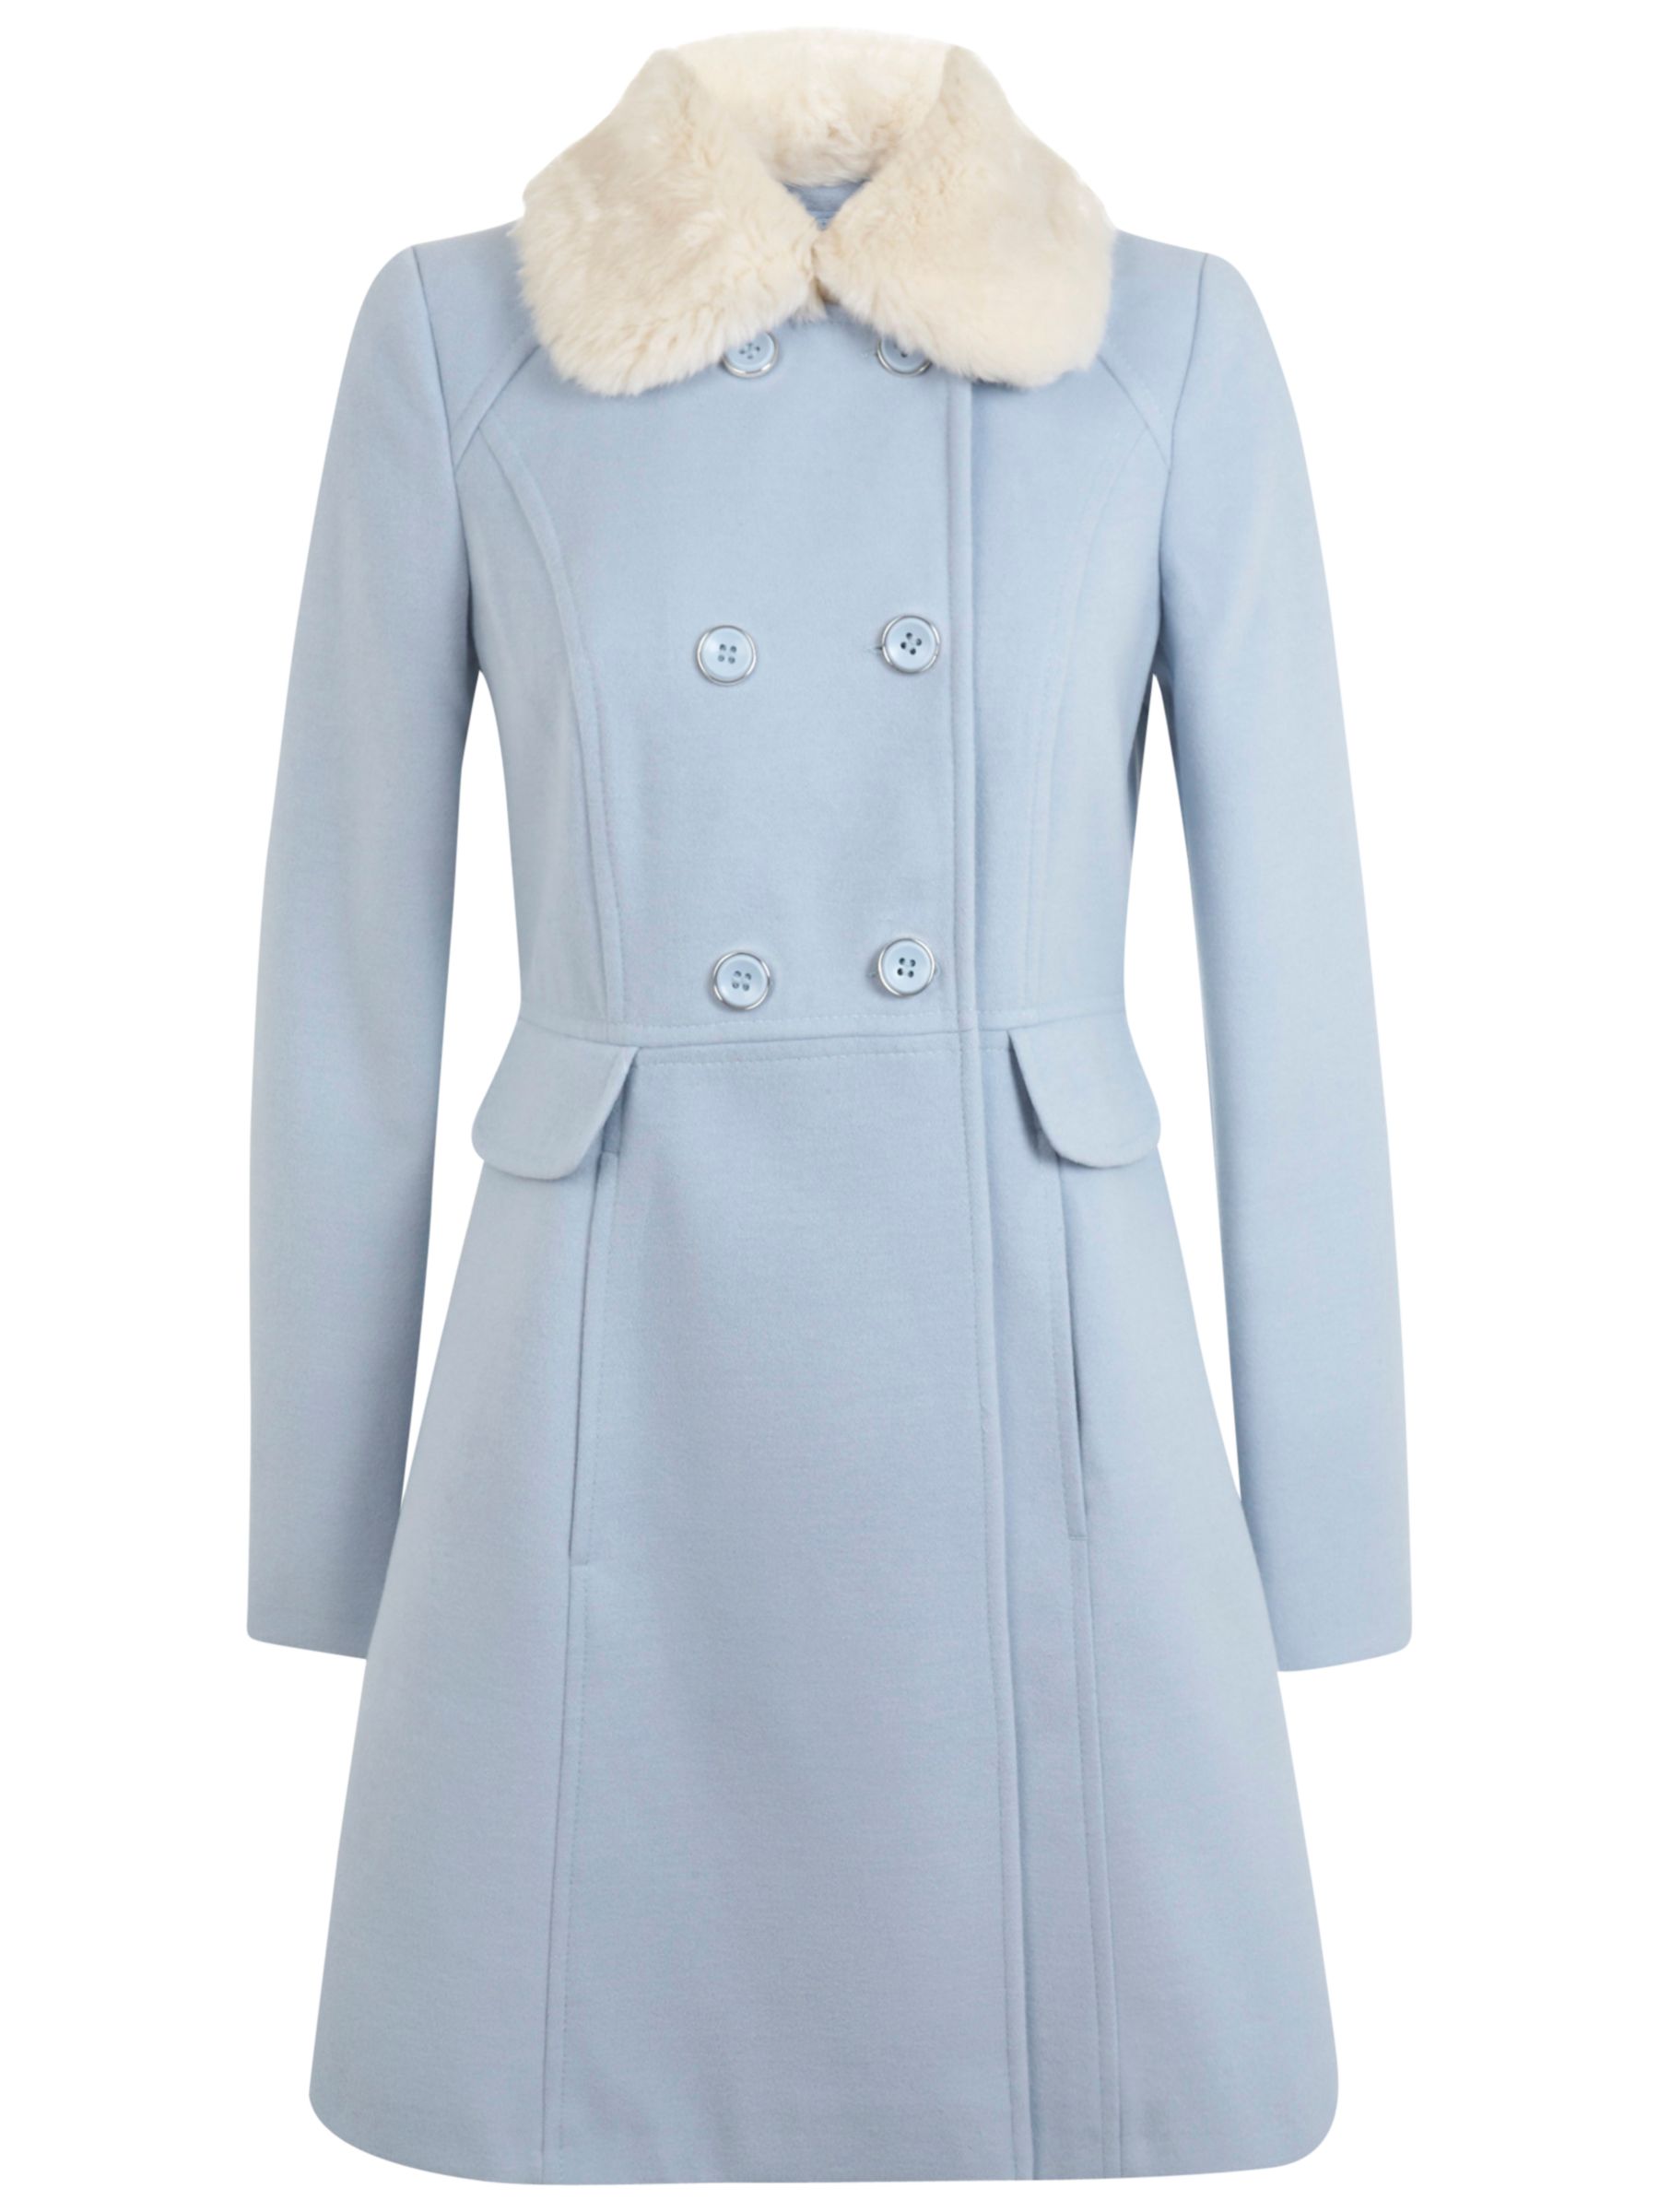 Miss Selfridge Double Breasted Skirted Coat, Pale Blue at John Lewis ...